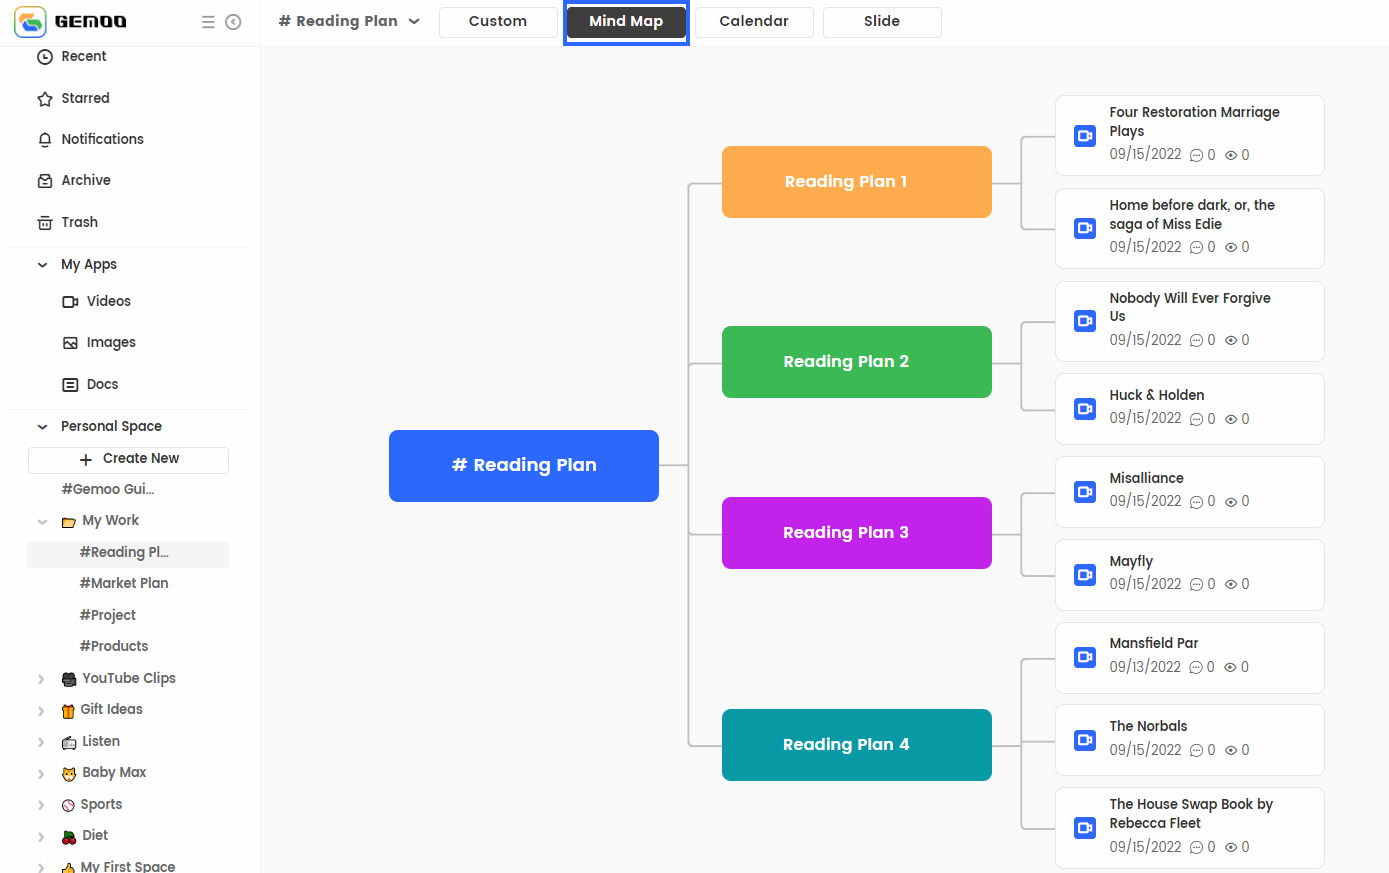 Displayed with Mind Map View